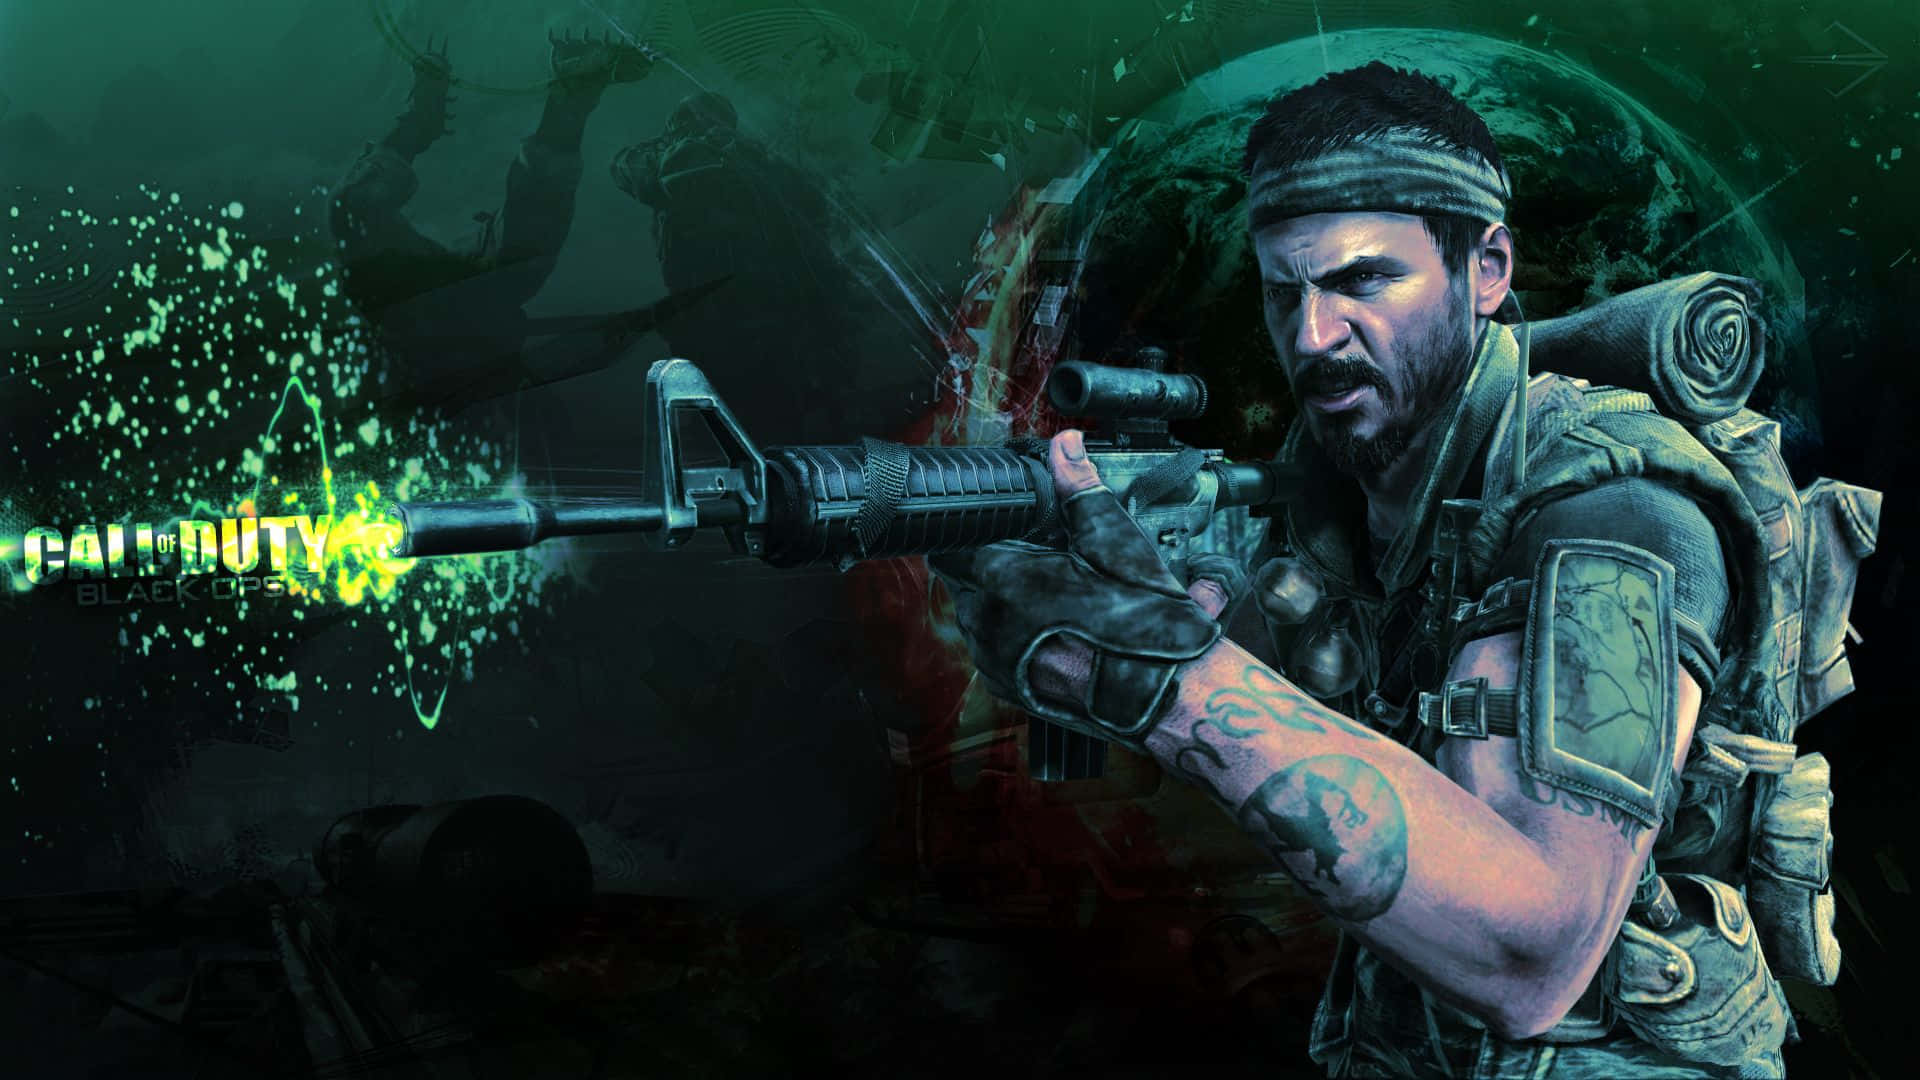 The Action is Intense in Call Of Duty Black Ops Wallpaper